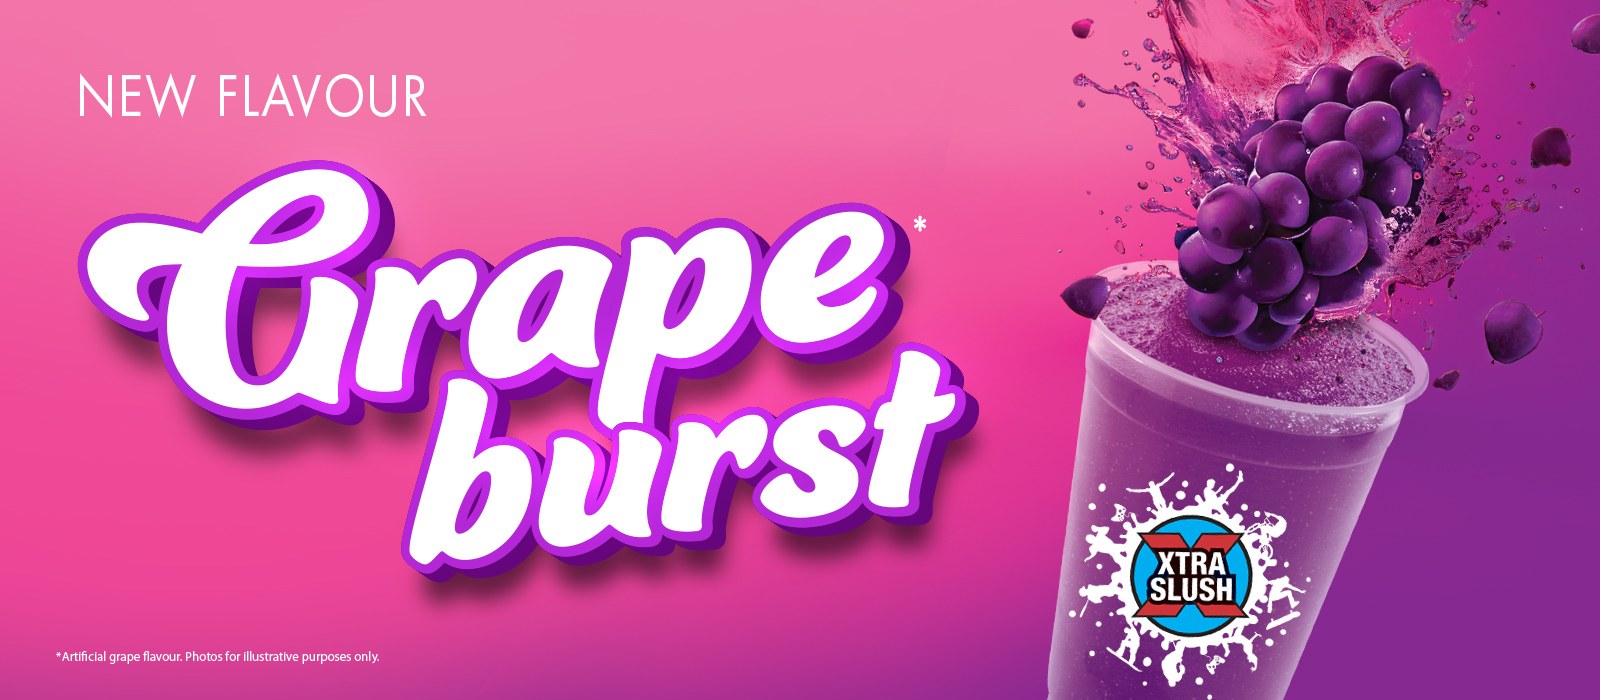 Colorful graphic promoting new grape burst flavour from xtra slush!